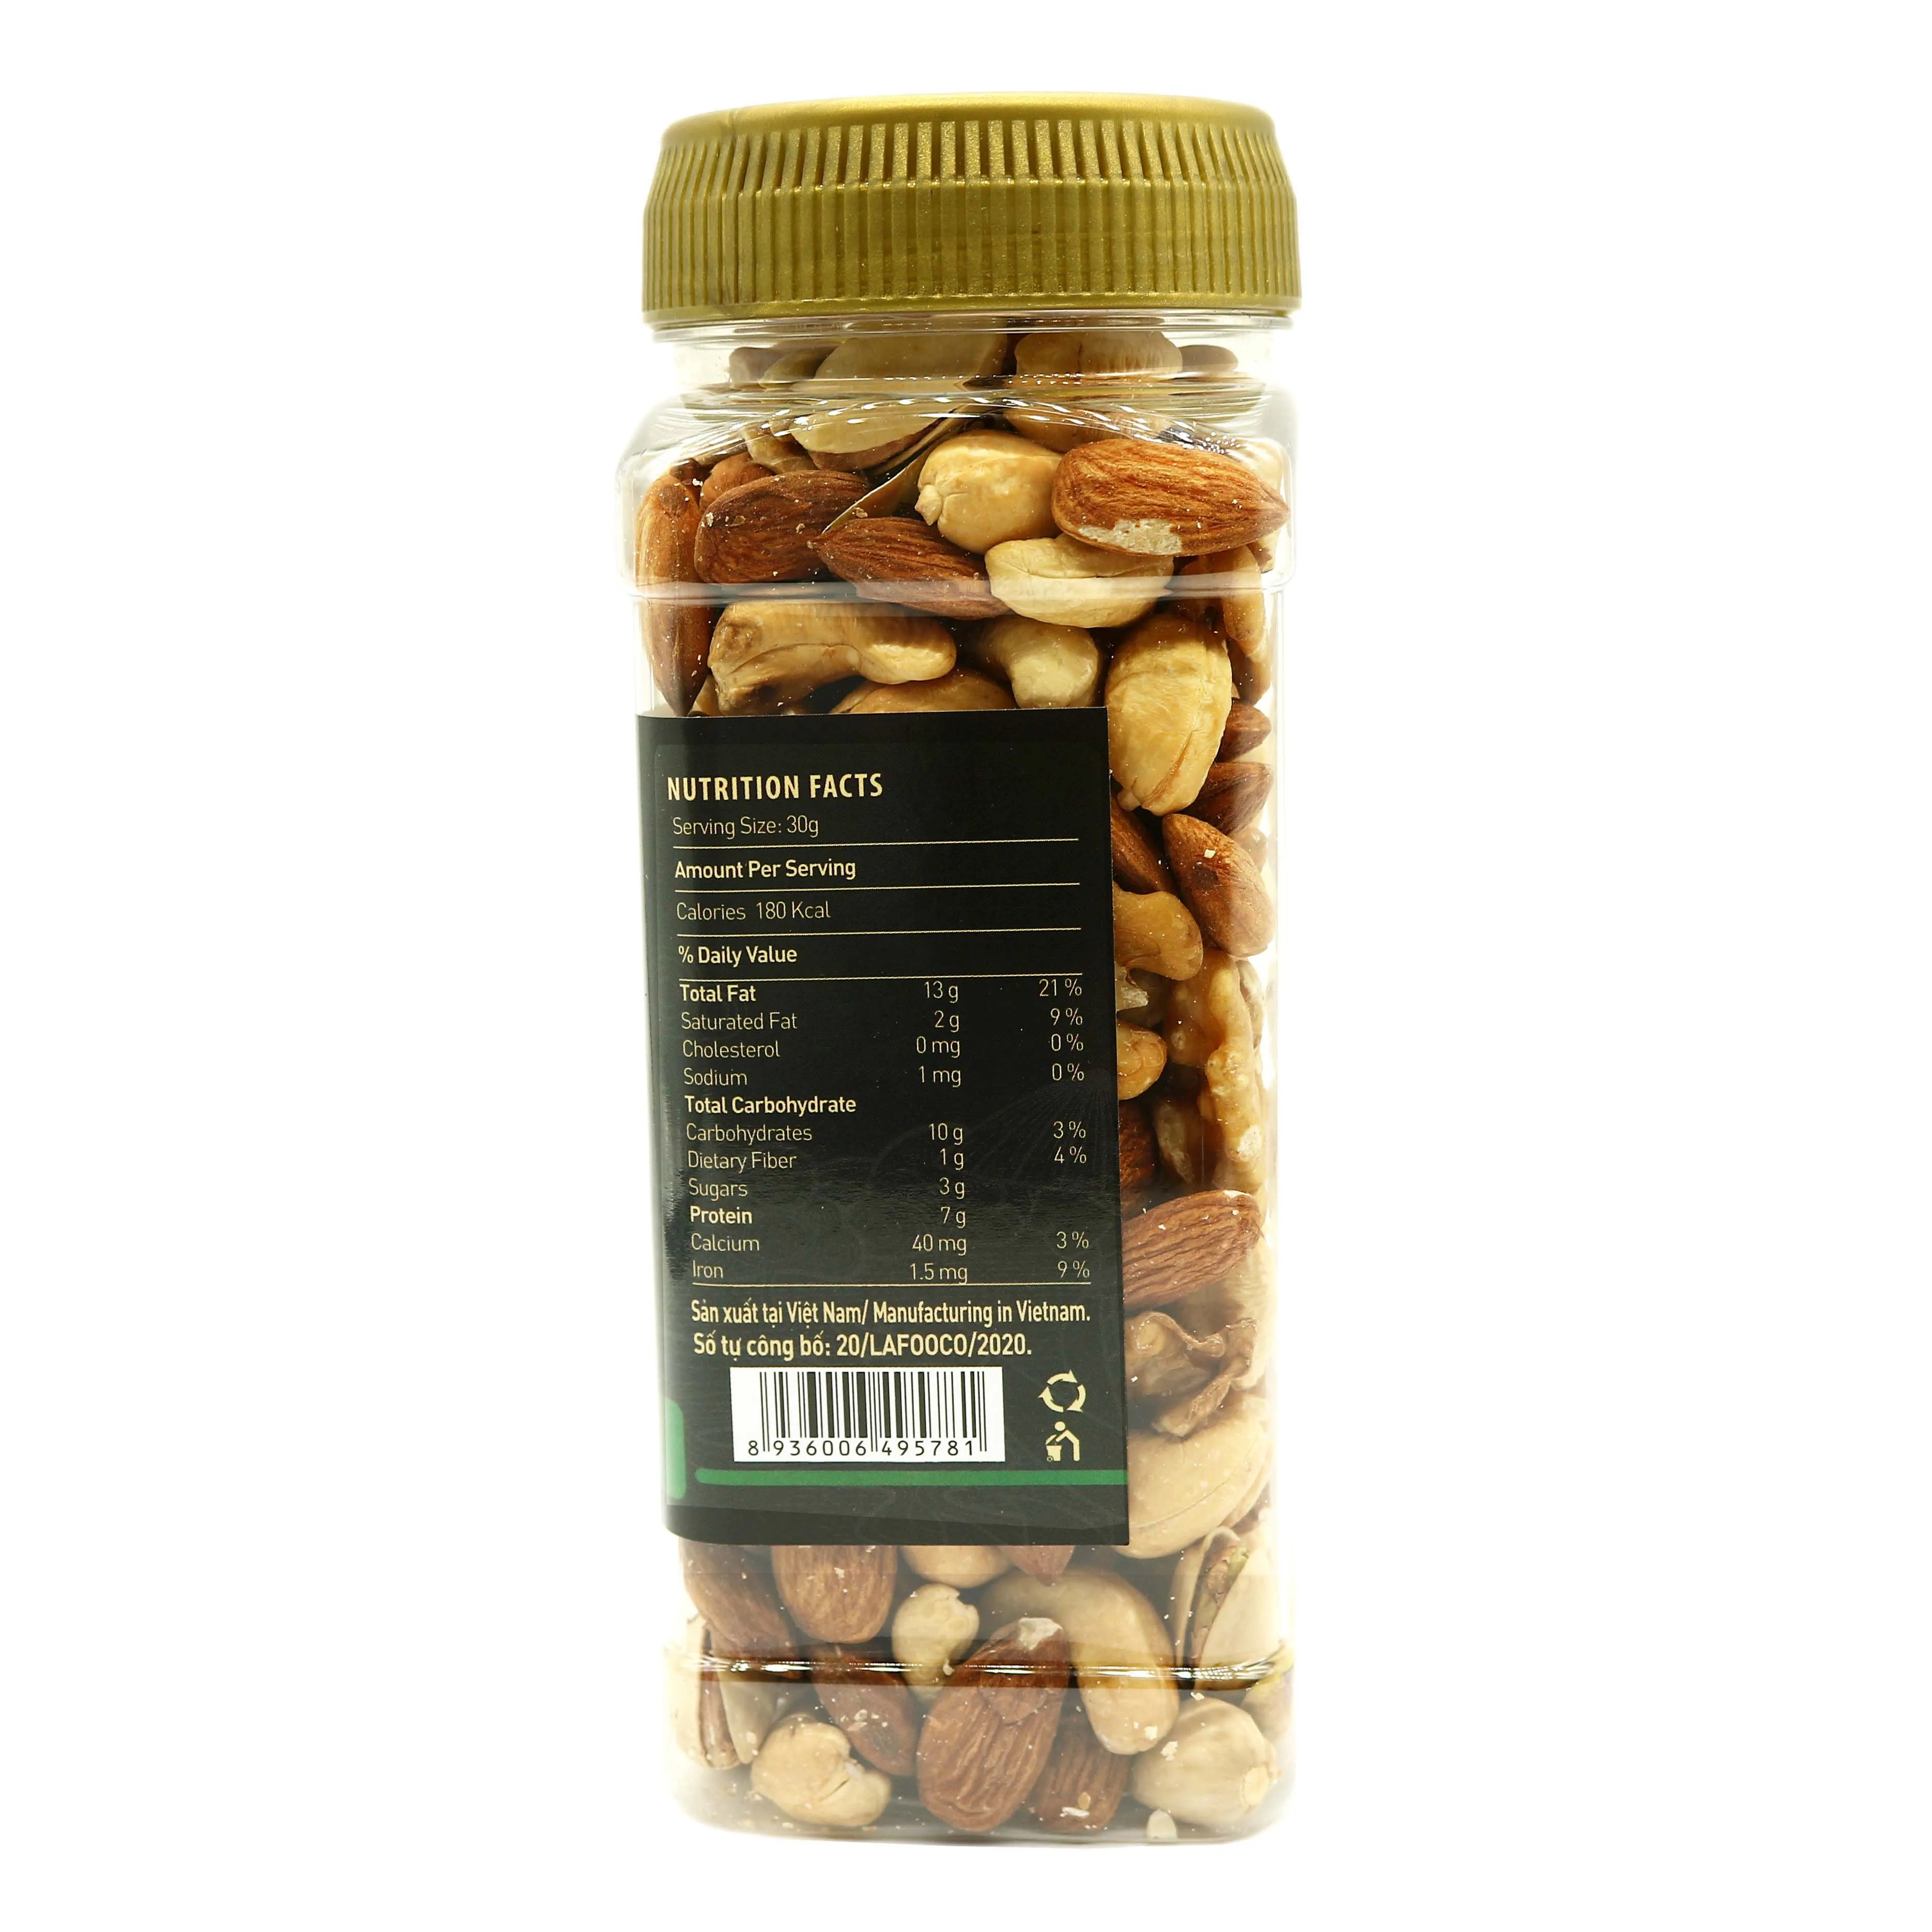 Unsalted Mixed Nuts Brand Lafooco 270g Plastic Jar - Buy Healthy Nuts ...